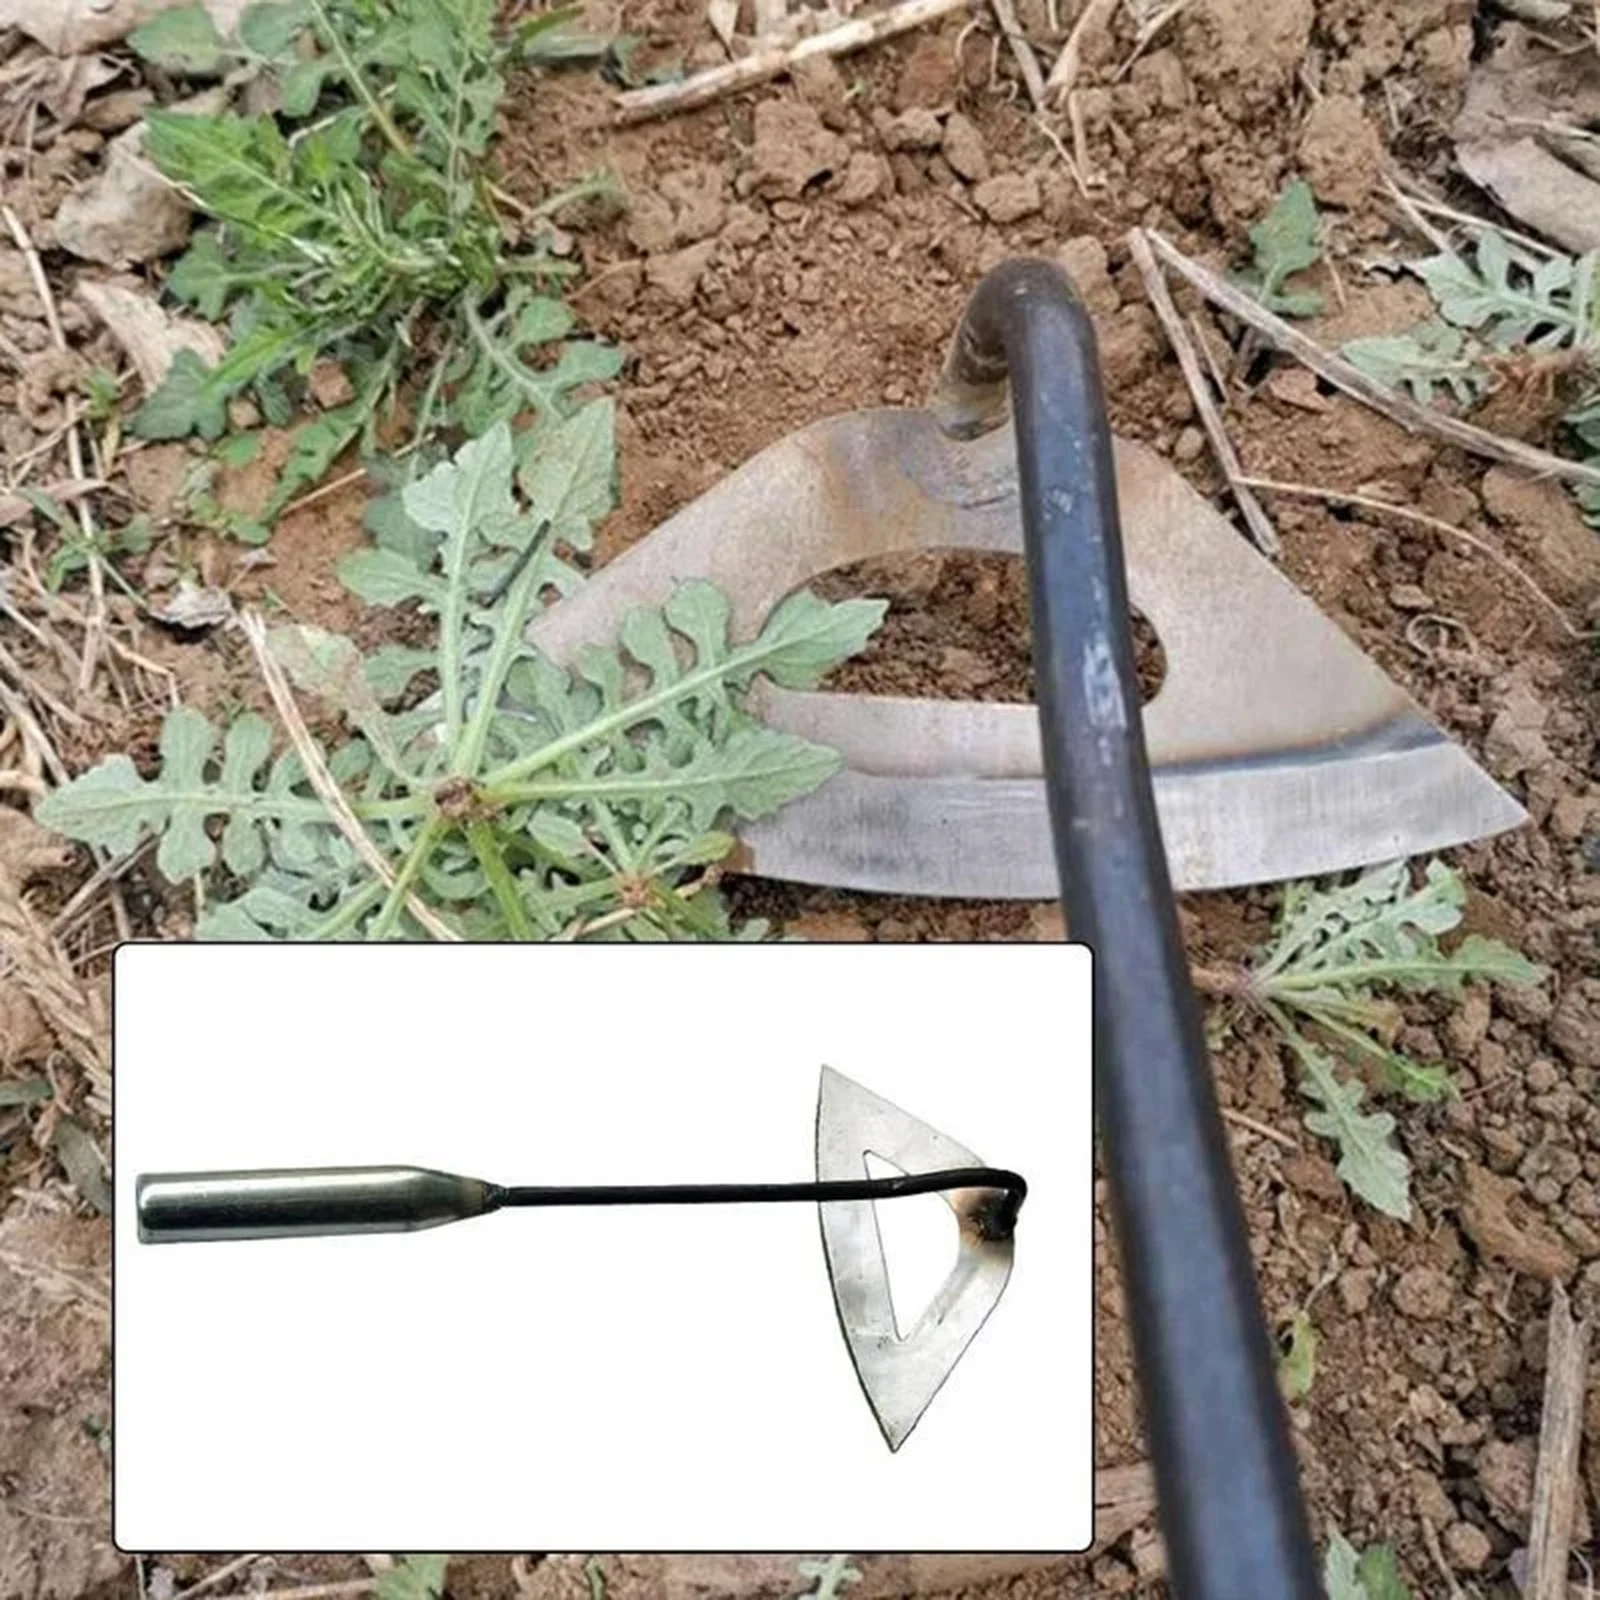 Traditional Household Welded Garden Hoe Weeding Cotton Hand Tool Sickle Cultivating Gardening Cultivator Planting Garden Tool